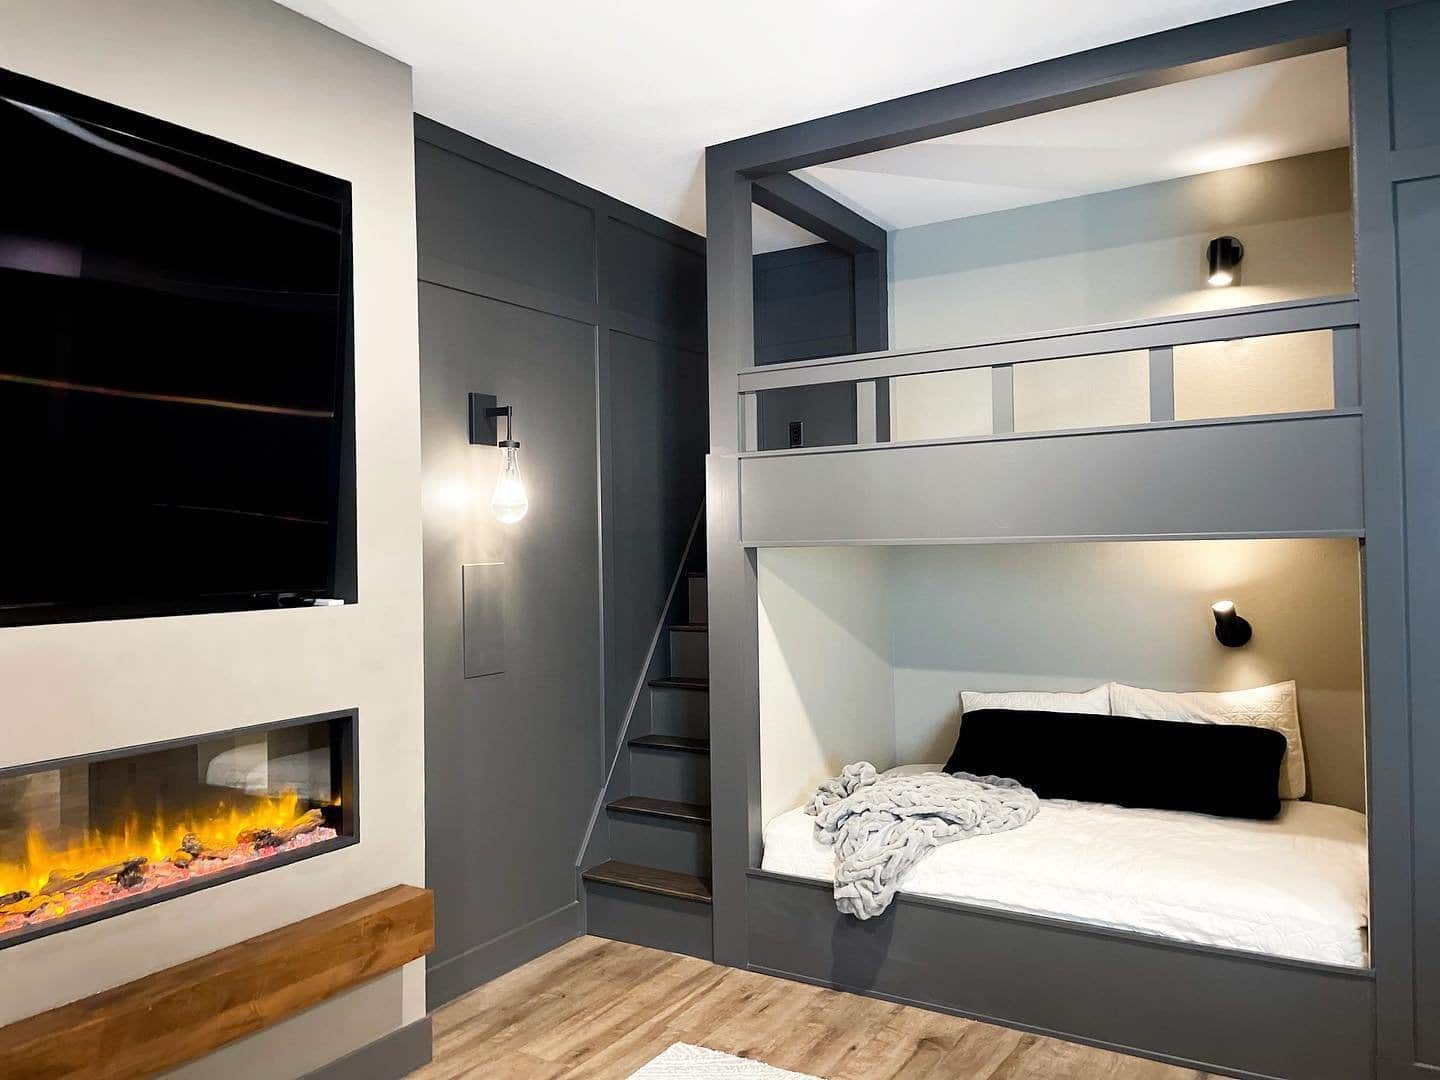 Kid's bedroom with built-in bunk beds and glassed-in fireplace